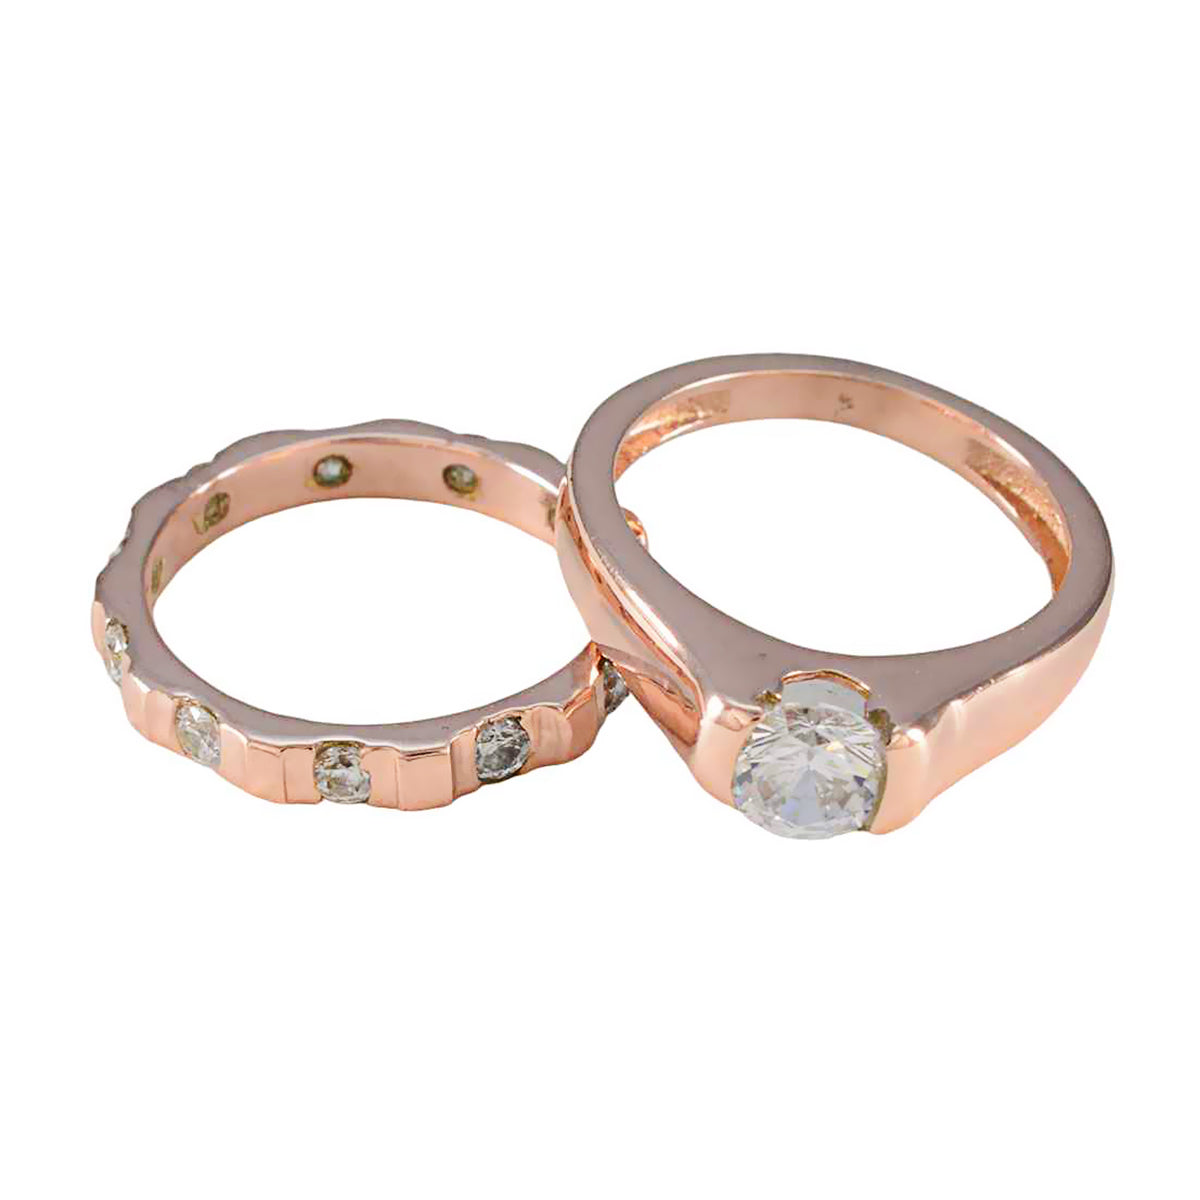 Riyo Perfect Silver Ring With Rose Gold Plating White CZ Stone Round Shape Prong Setting  Jewelry Anniversary Ring